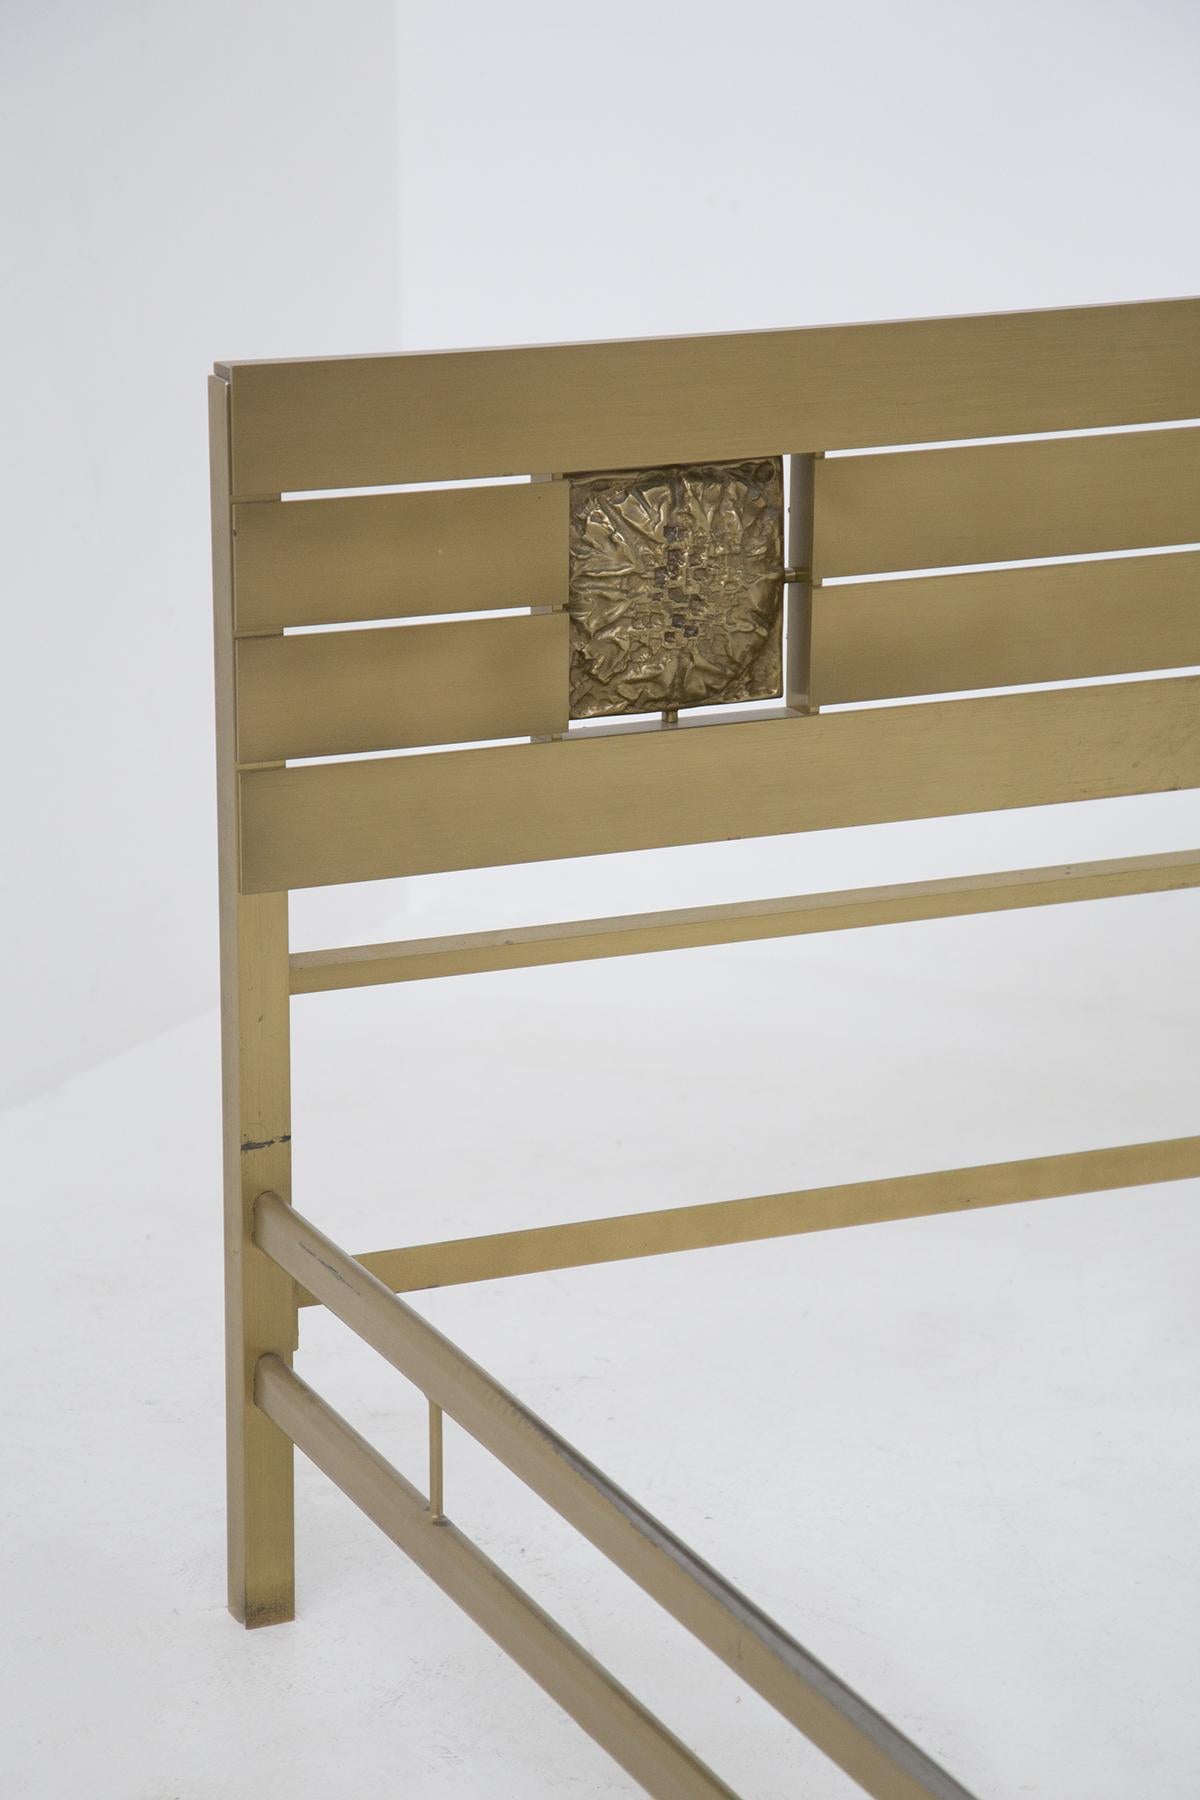 This brass bed is designed by Luciano Frigerio in the 1970s and it is of fine Italian manufacture. The bed frame is completely made of brass, with 4 square-shaped supporting feet. The legs are connected to each other by two parallel brass bands,